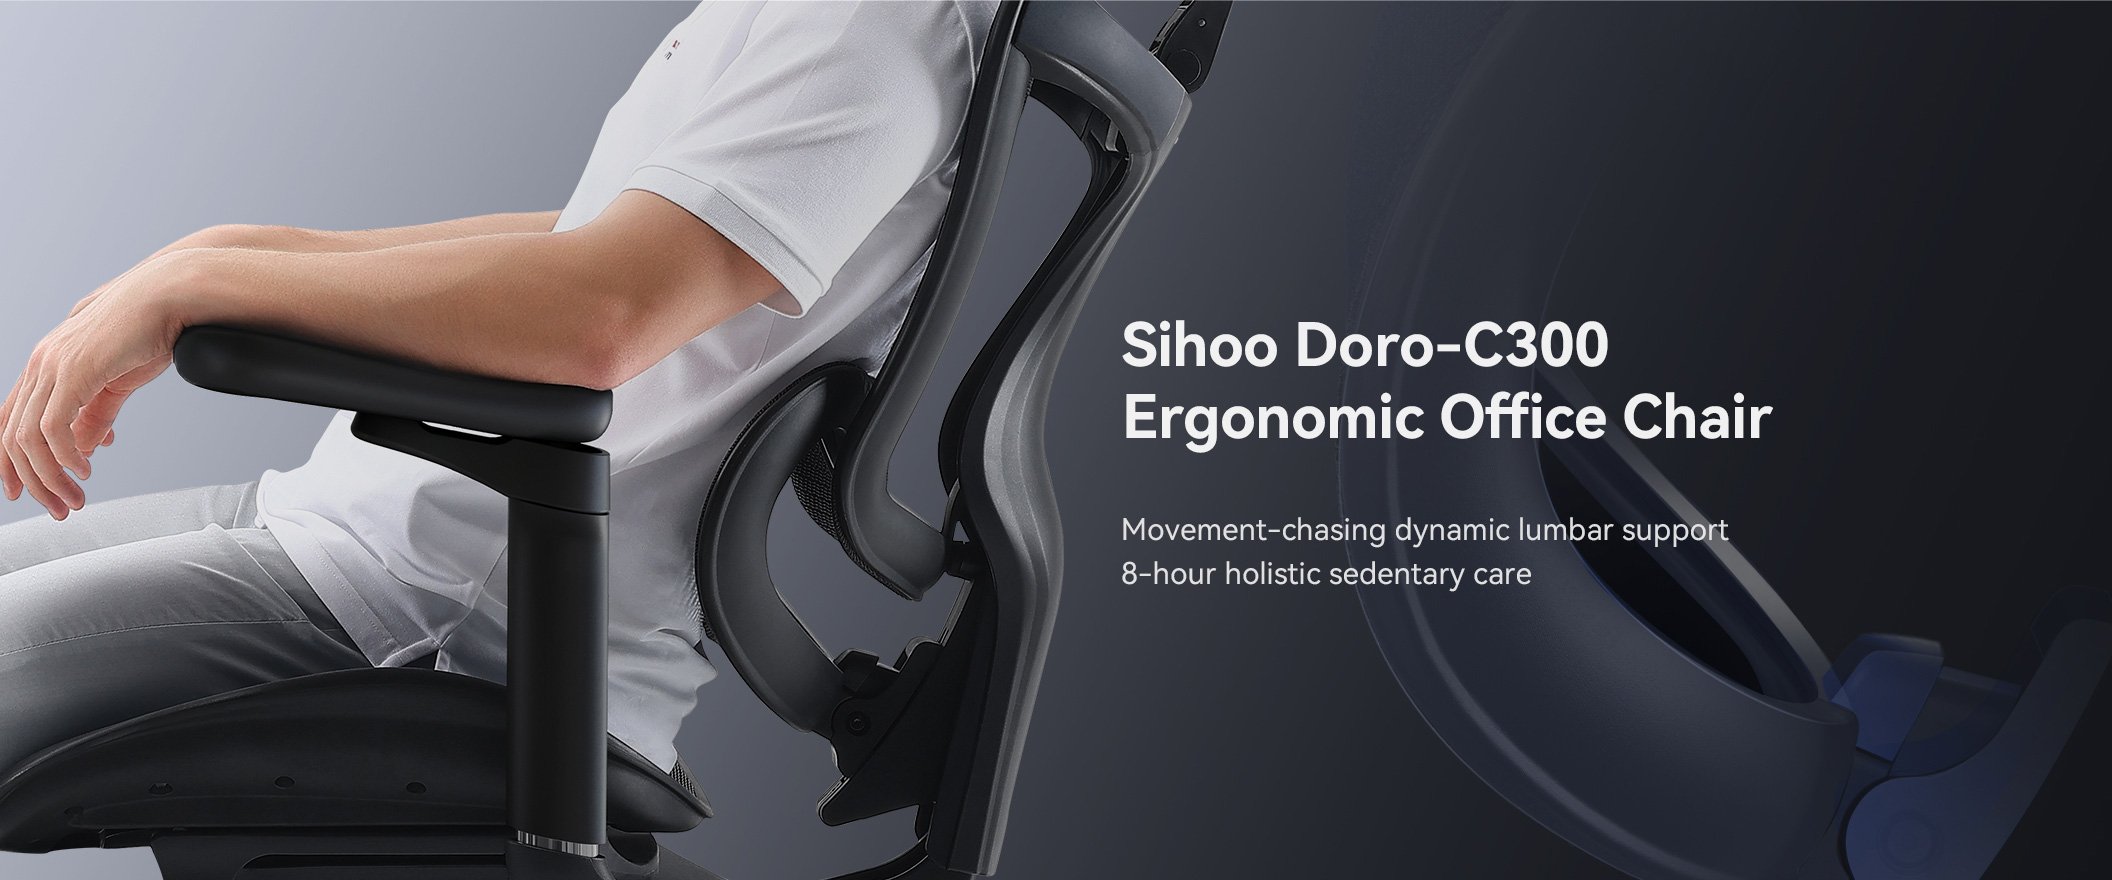 SIHOO Ergonomic Ofiice Chair Doro-C300, Auto-Adaptive Lumbar Support, 3D  Linkage Armrests, Computer Desk Chair with 4-Position Adjustable Backrest,  Mesh Office Chair for 300lbs, Black 